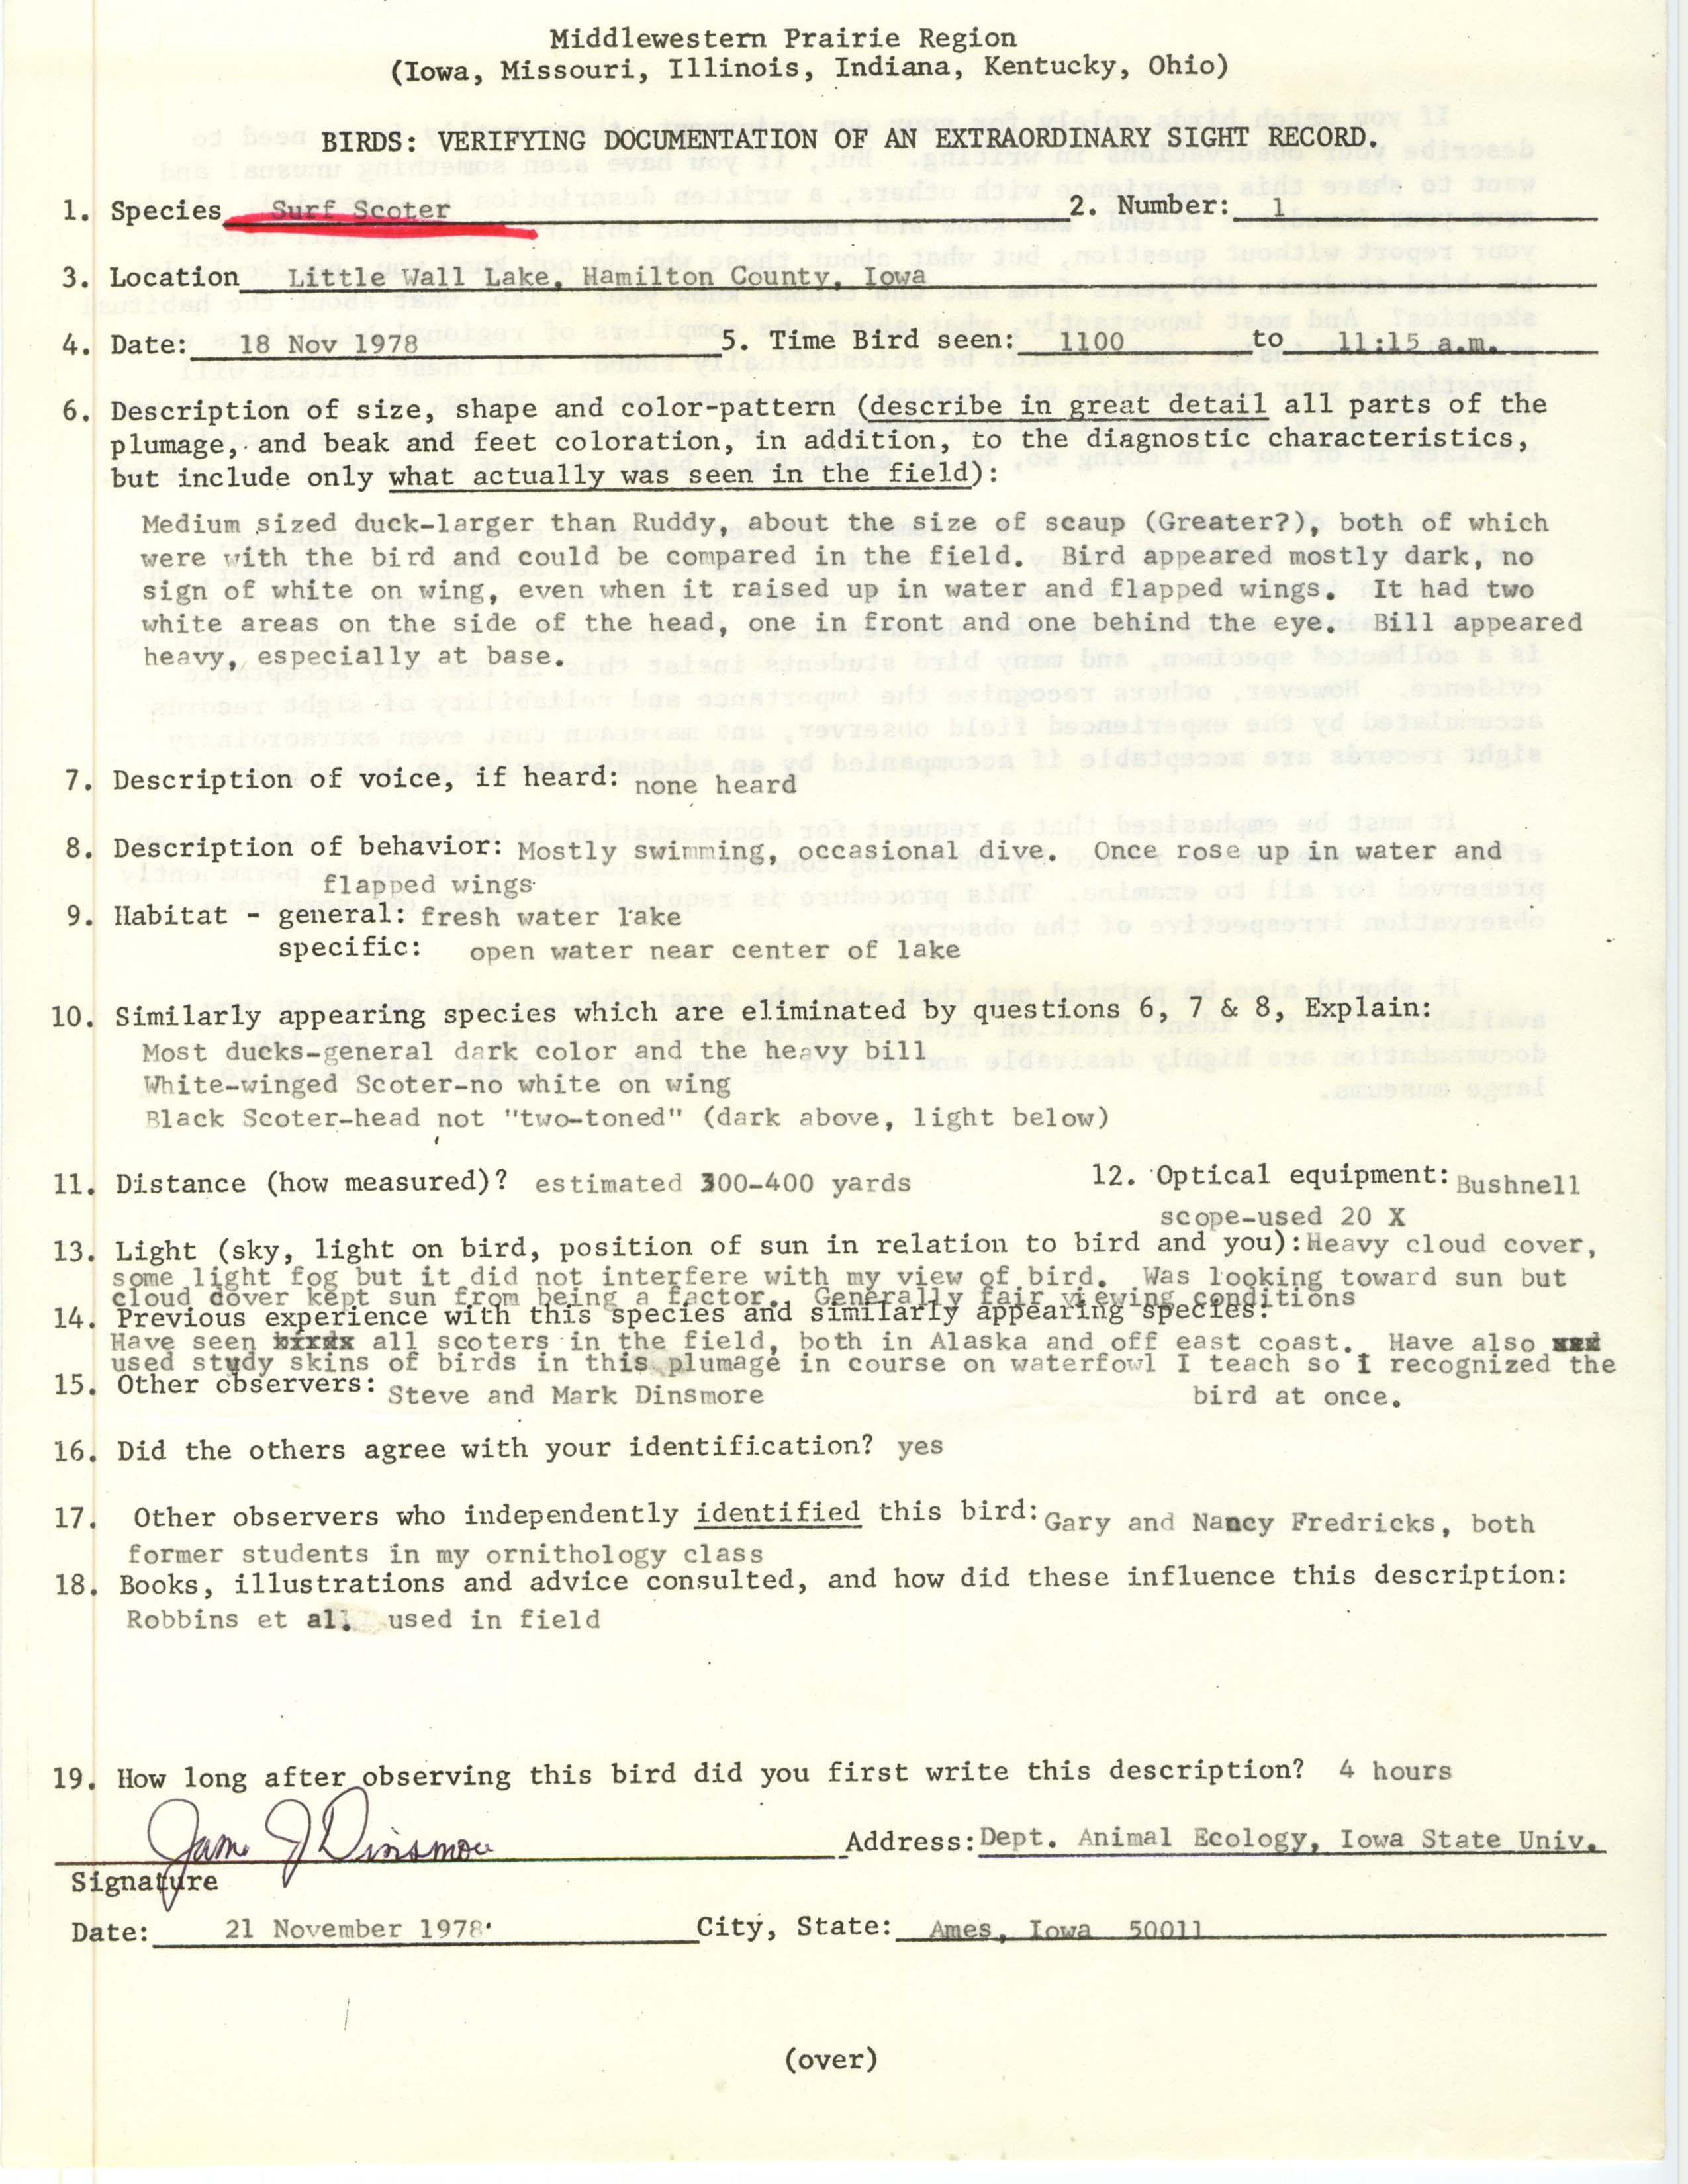 Rare bird documentation form for Surf Scoter at Little Wall Lake, 1978